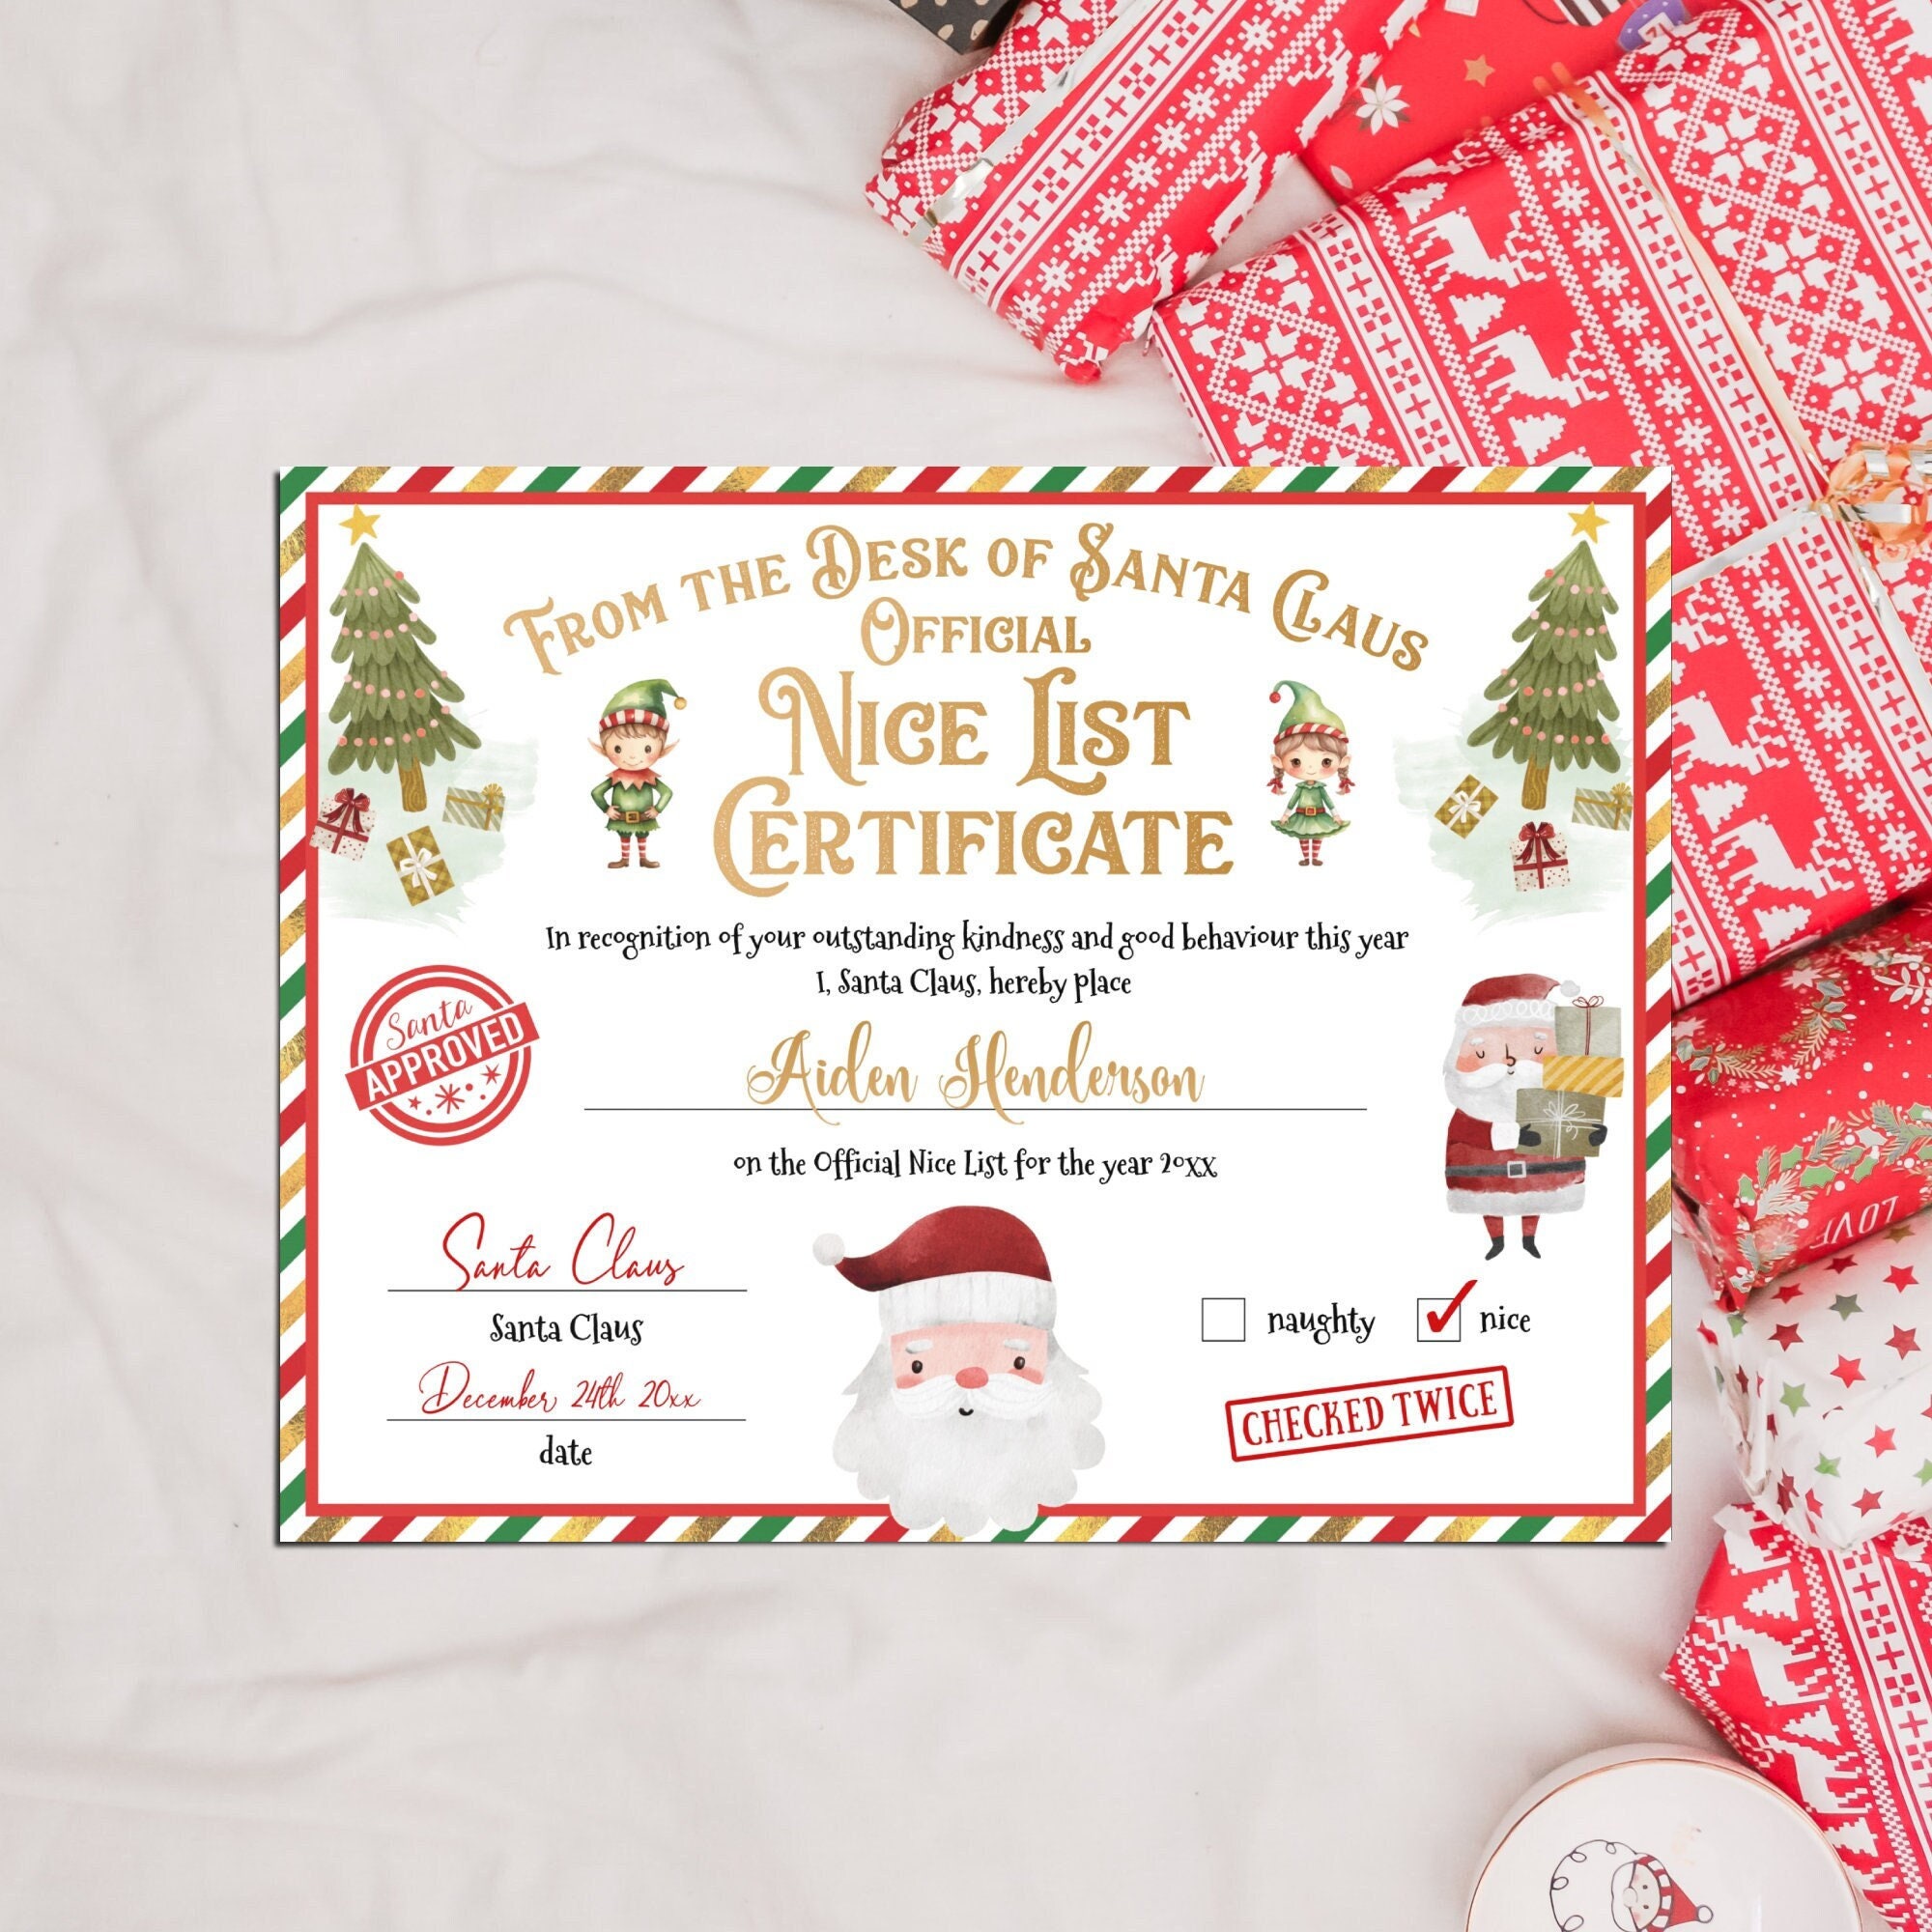 Nice and Naughty List Certificates - 48-Pack Christmas Certificate Paper  from Santa Claus for Kids, Xmas Party Favors, Gold Foil Print Design, 36  Nice